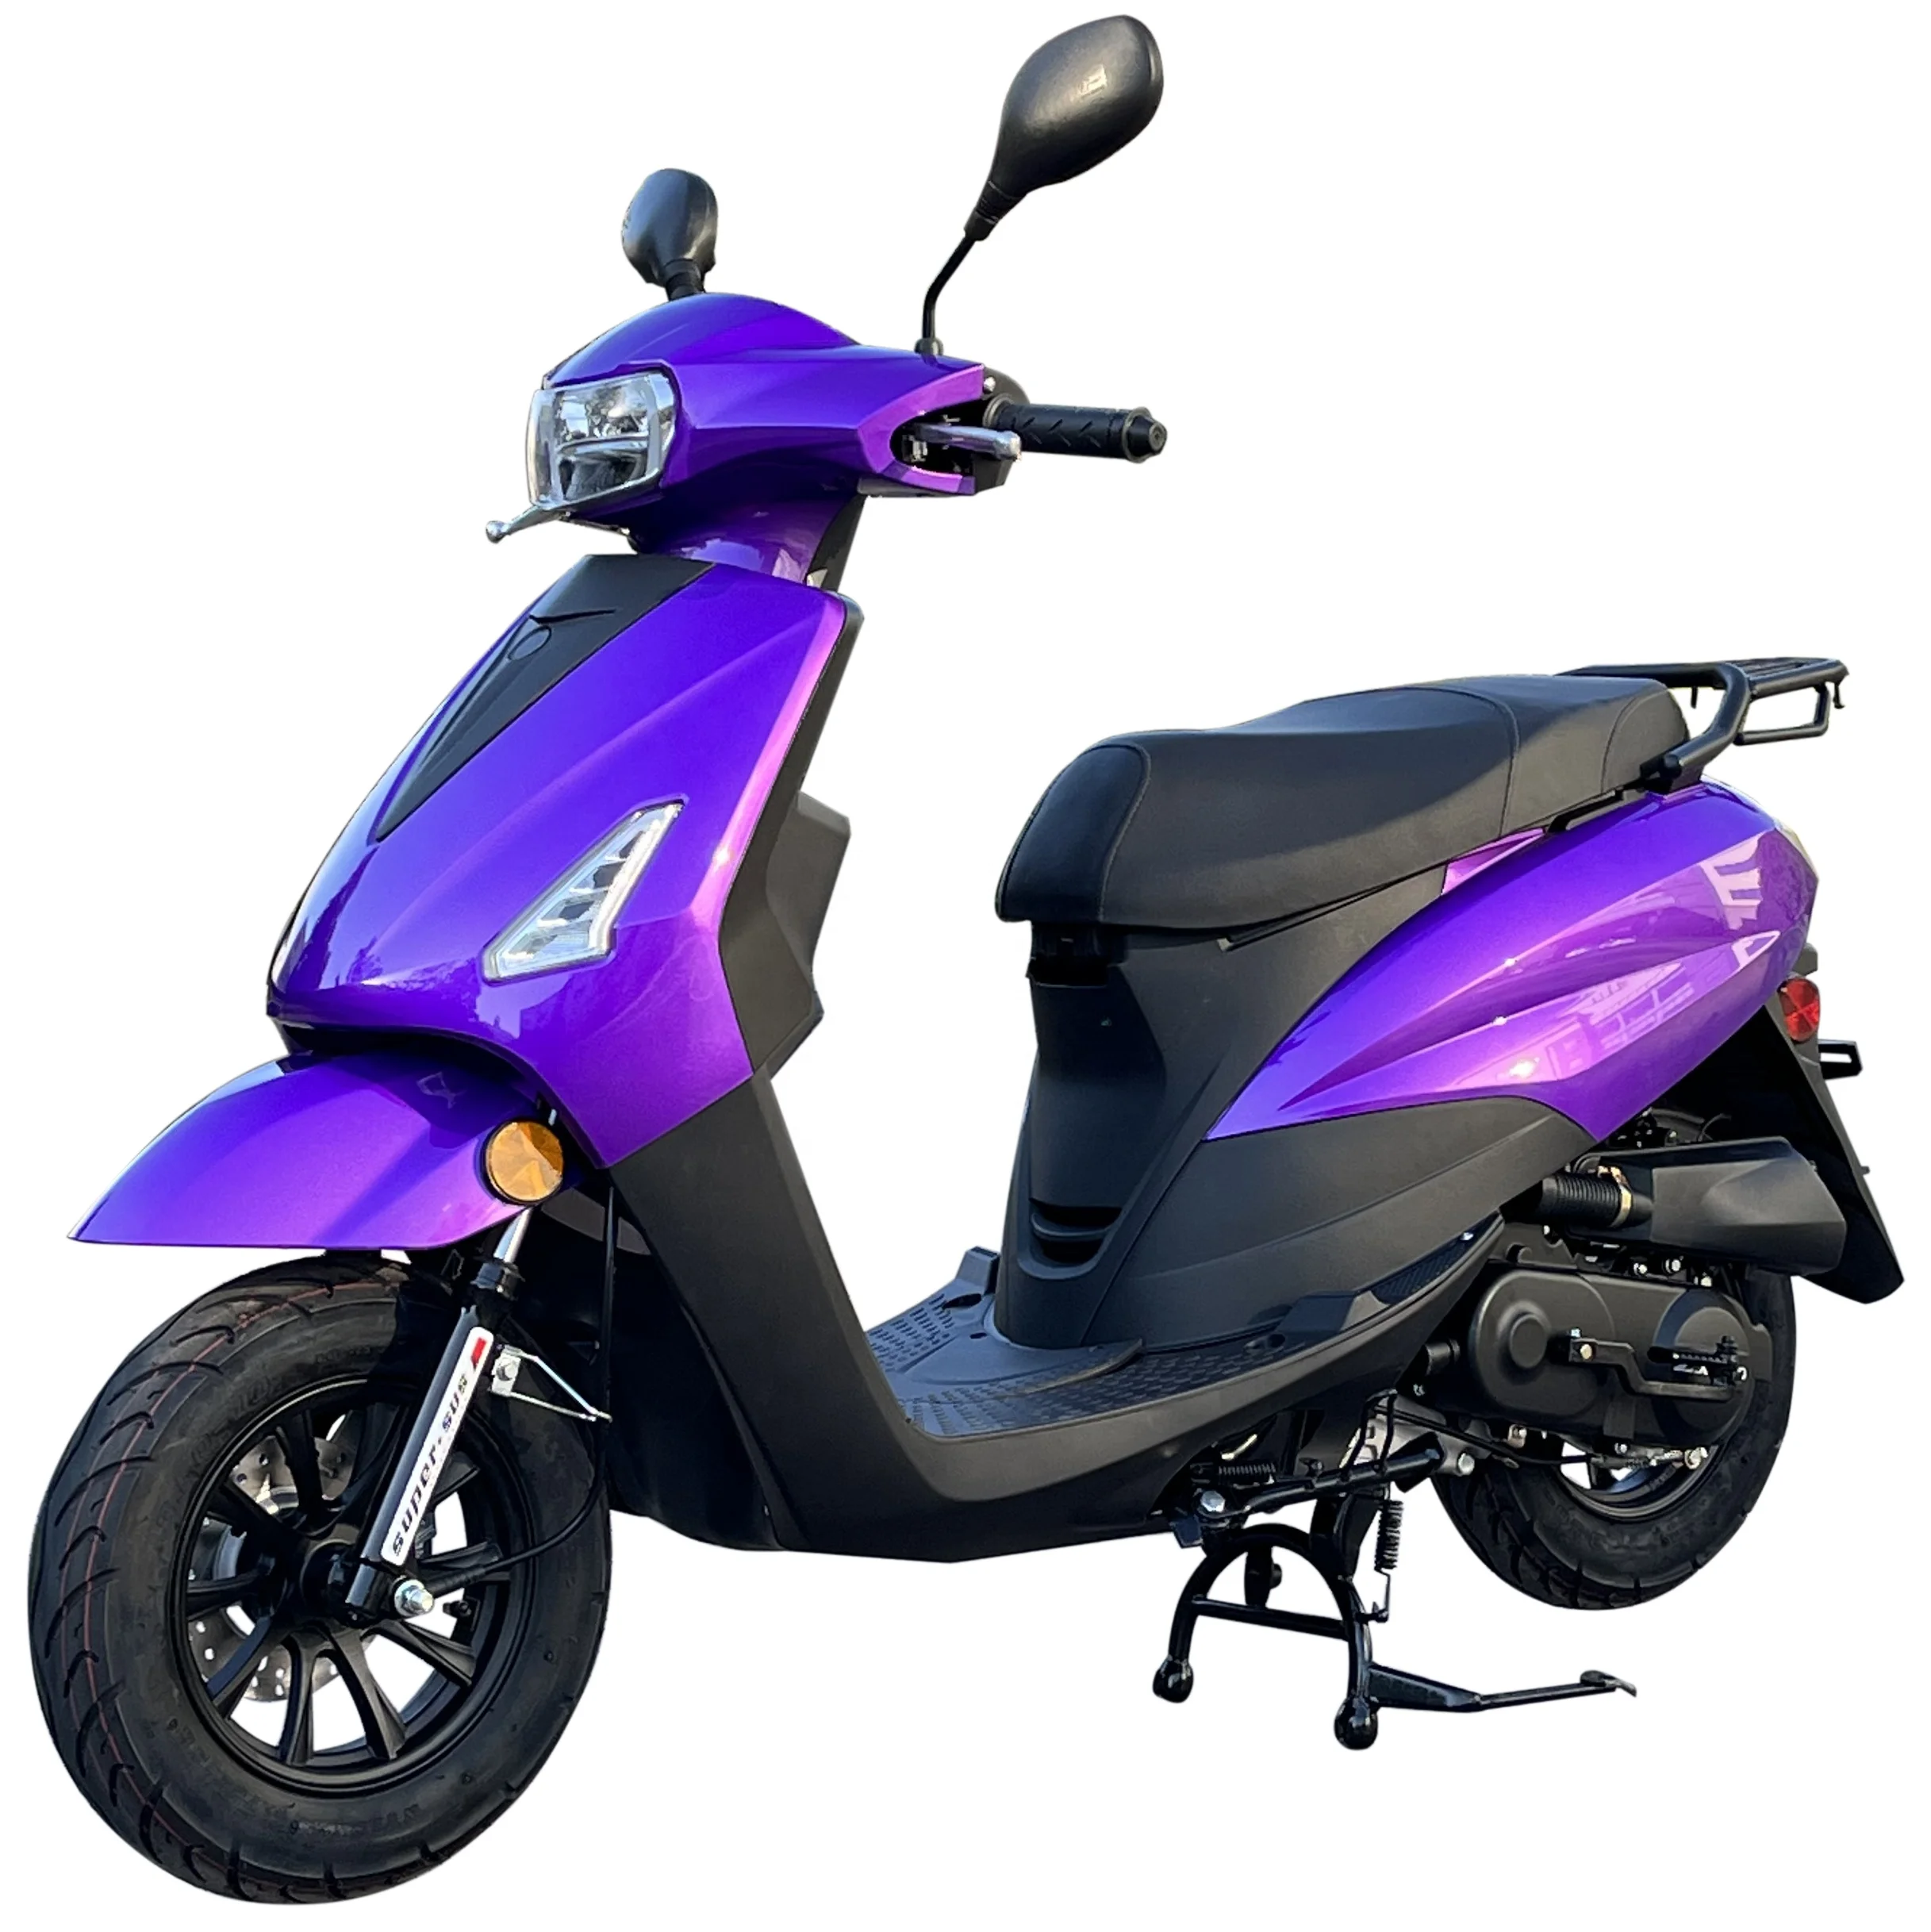 

Reliable Quality Hydraulic Suspension EPA DOT 50 Cc Motor Air Cooled Moped Gas Power Scooter Street Bike